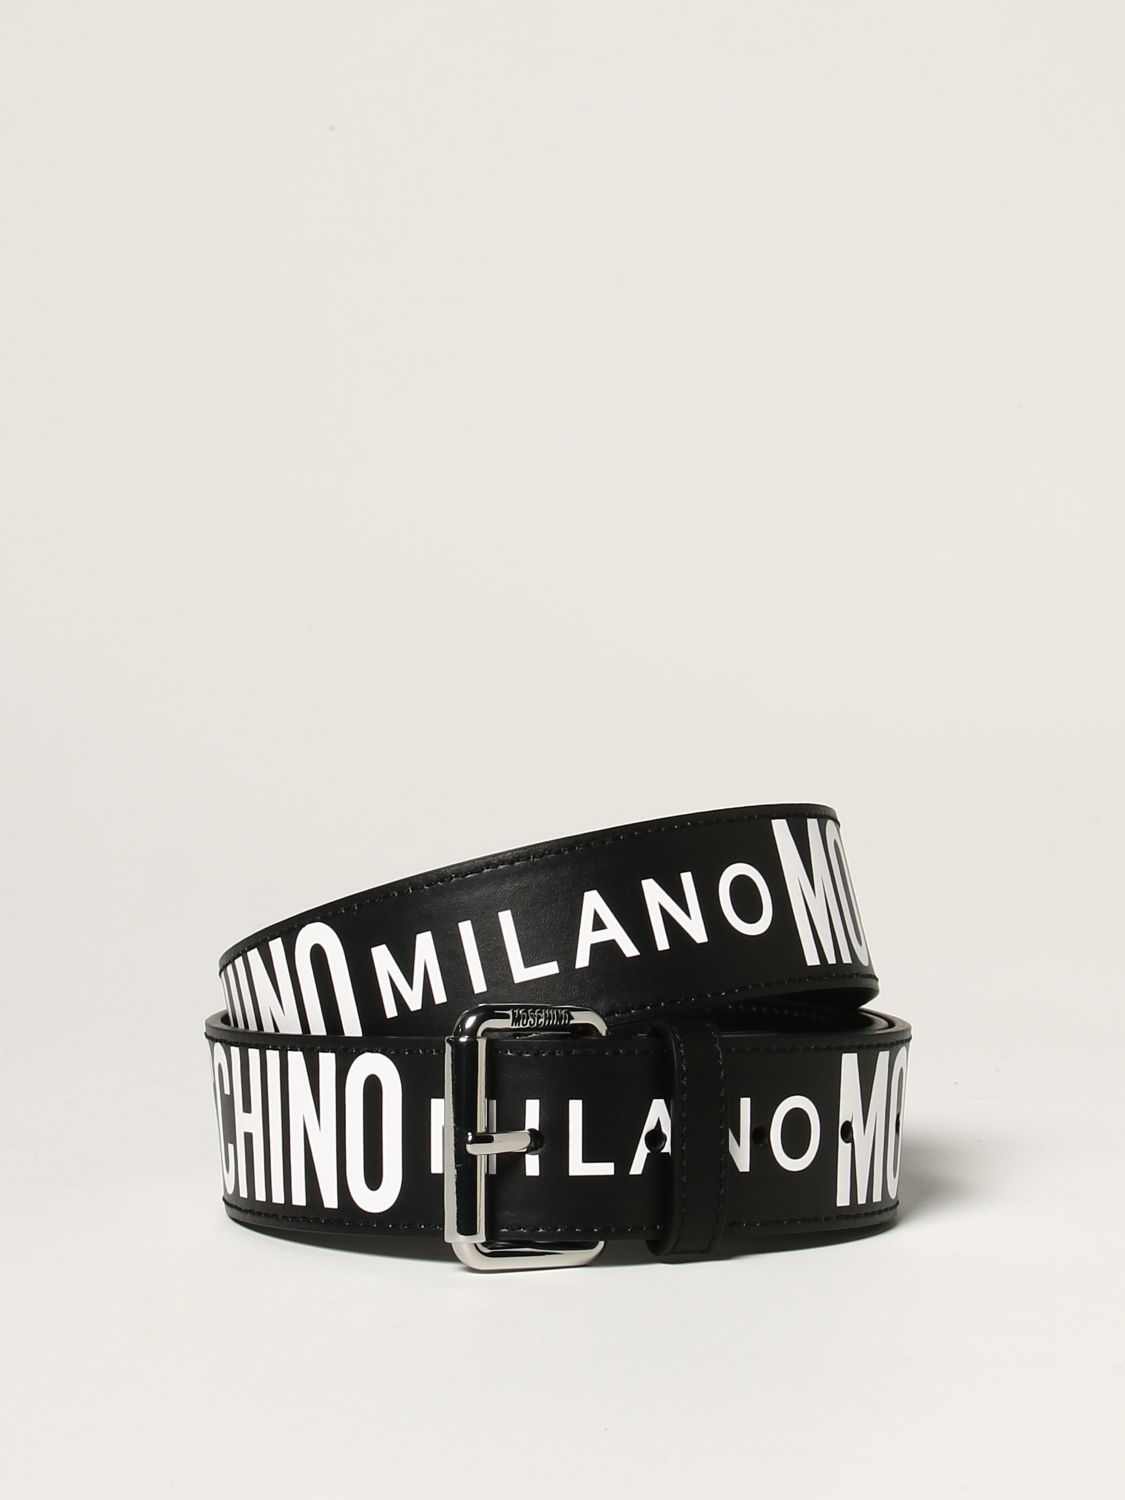 Belt Moschino Couture: Moschino Couture leather belt with logo black 1